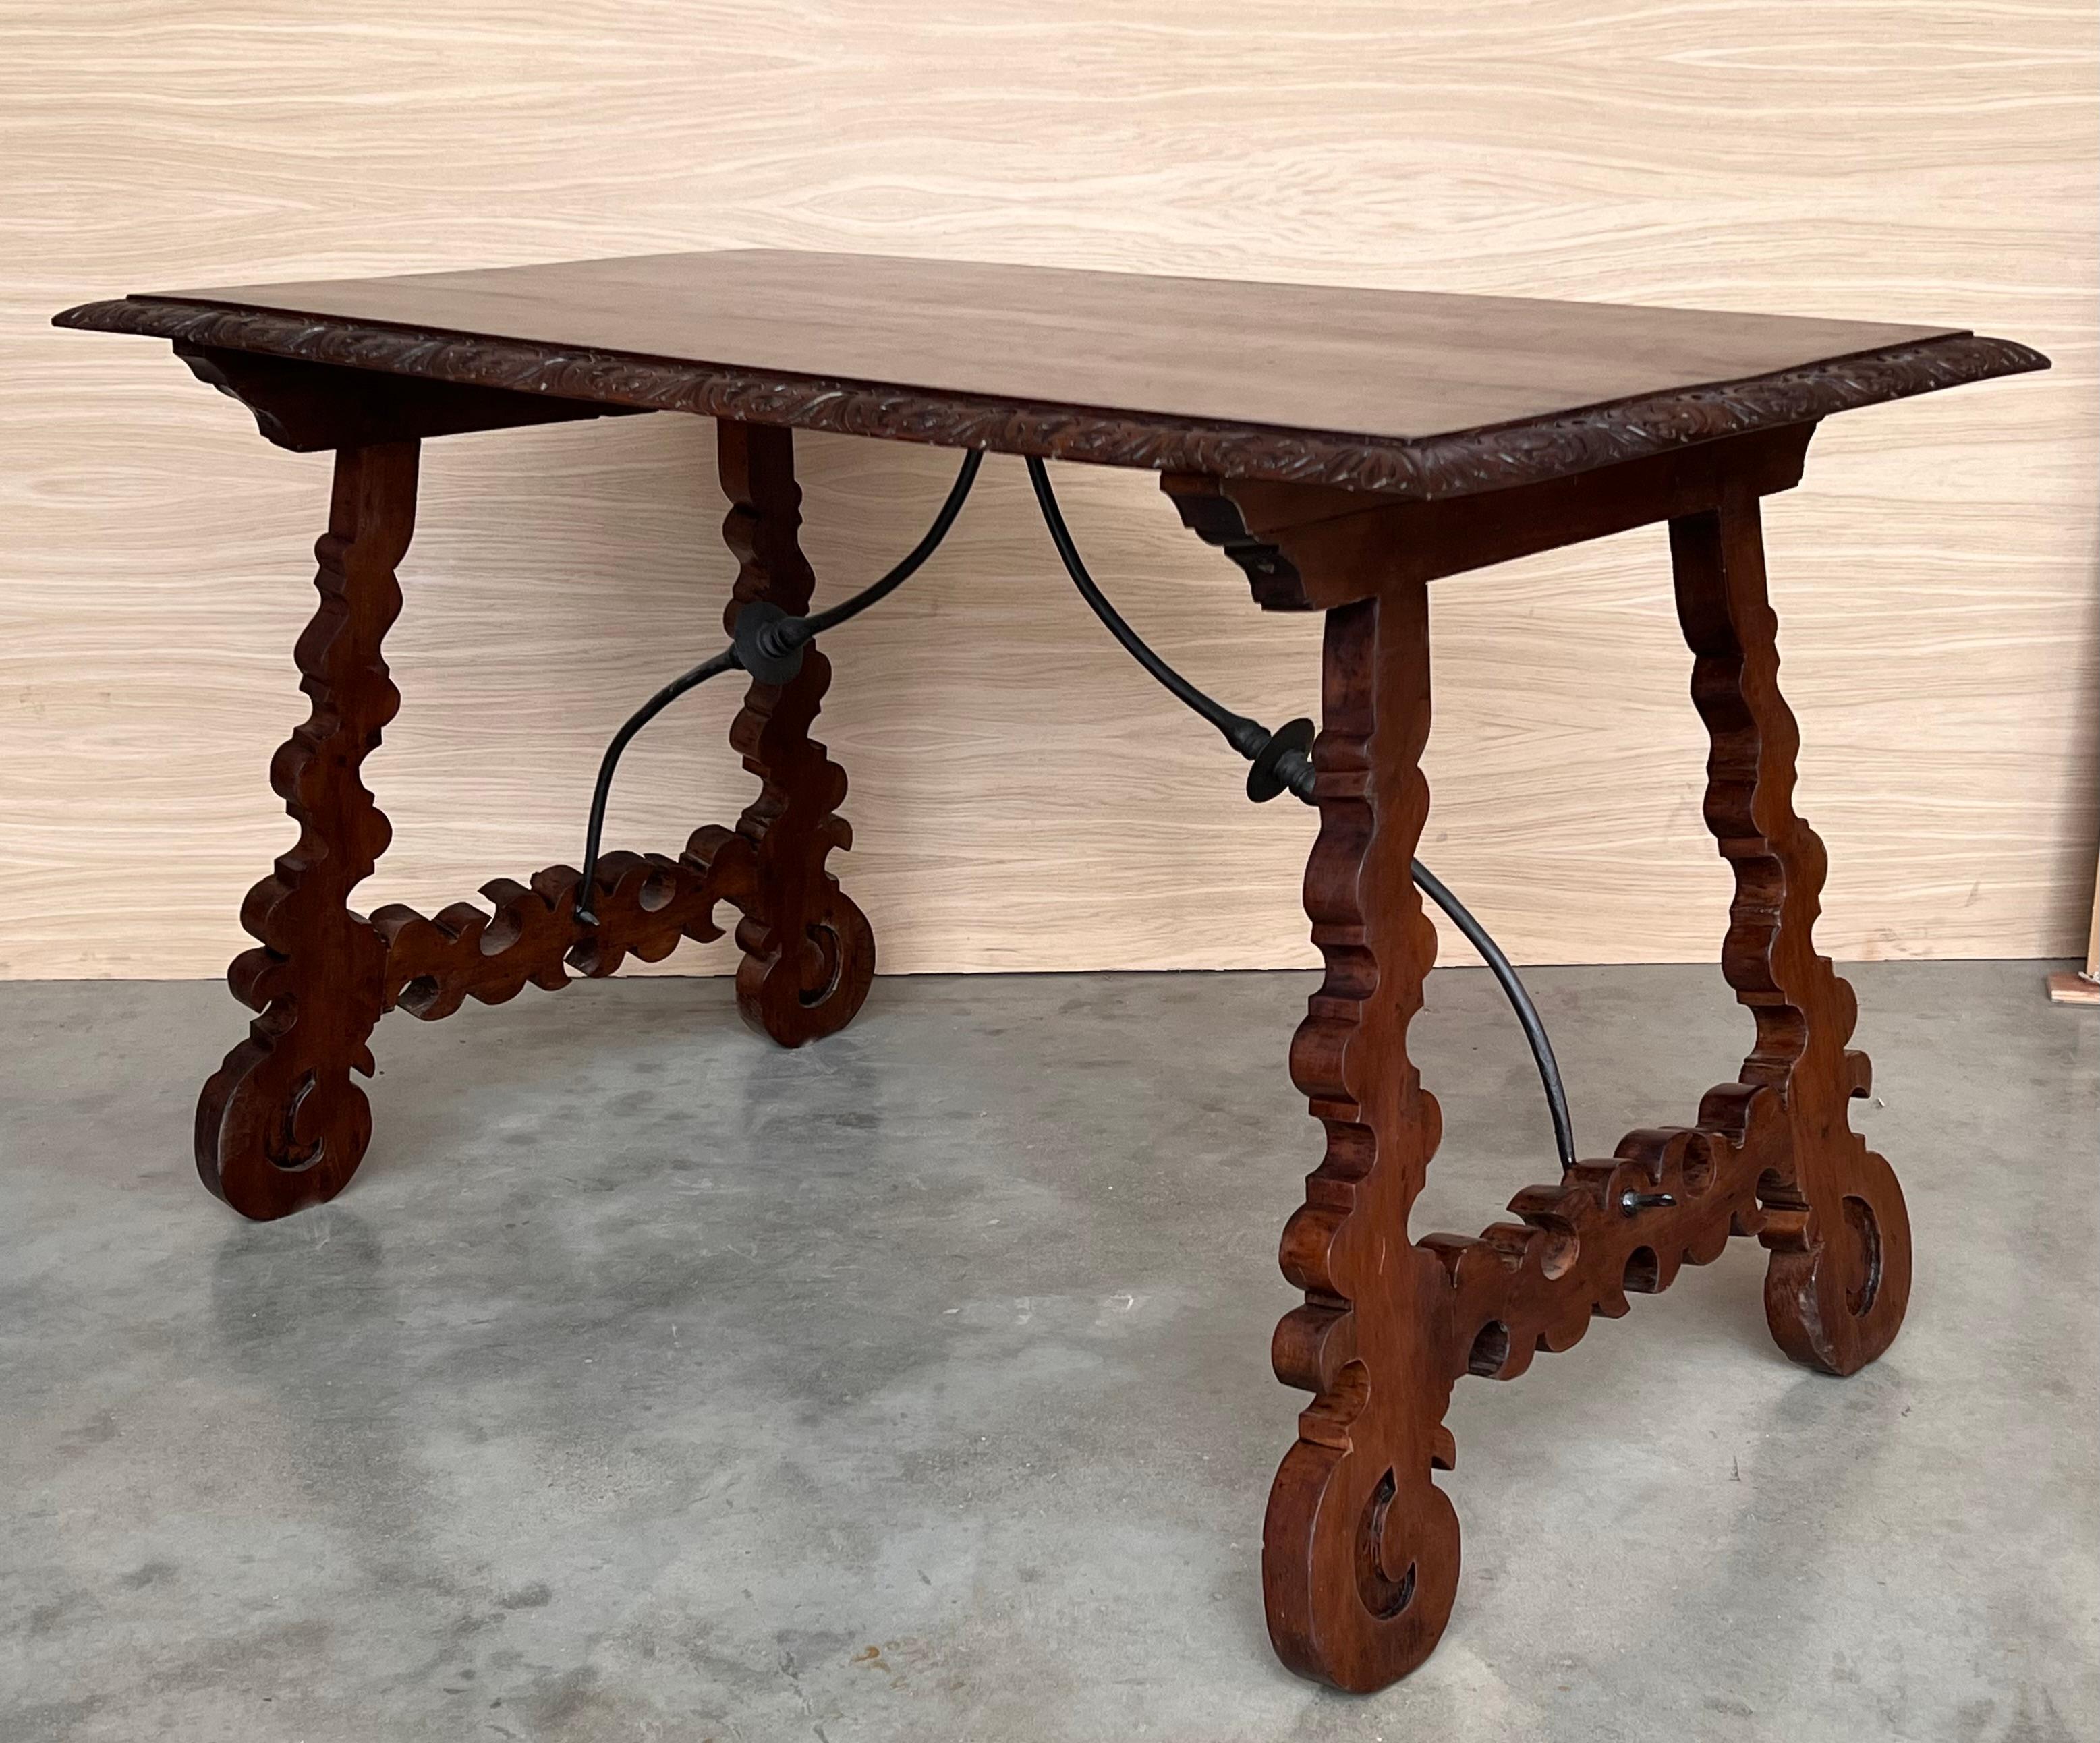 Side Table of Walnut with Carved Lyre Legs and Top, Spanish, 19th Century For Sale 2